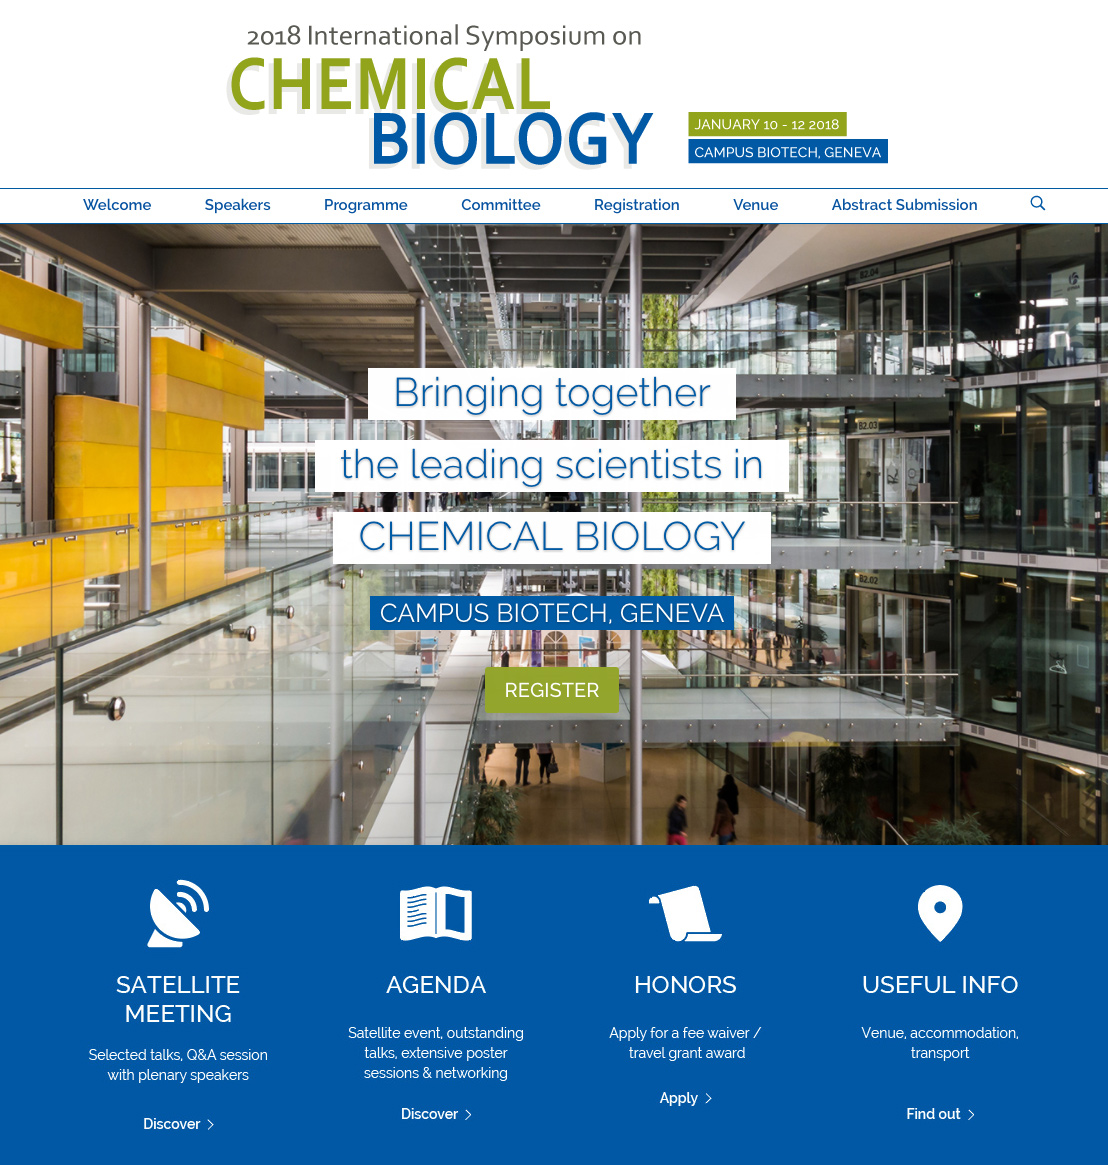 Symposium on Chemical Biology - project image 1